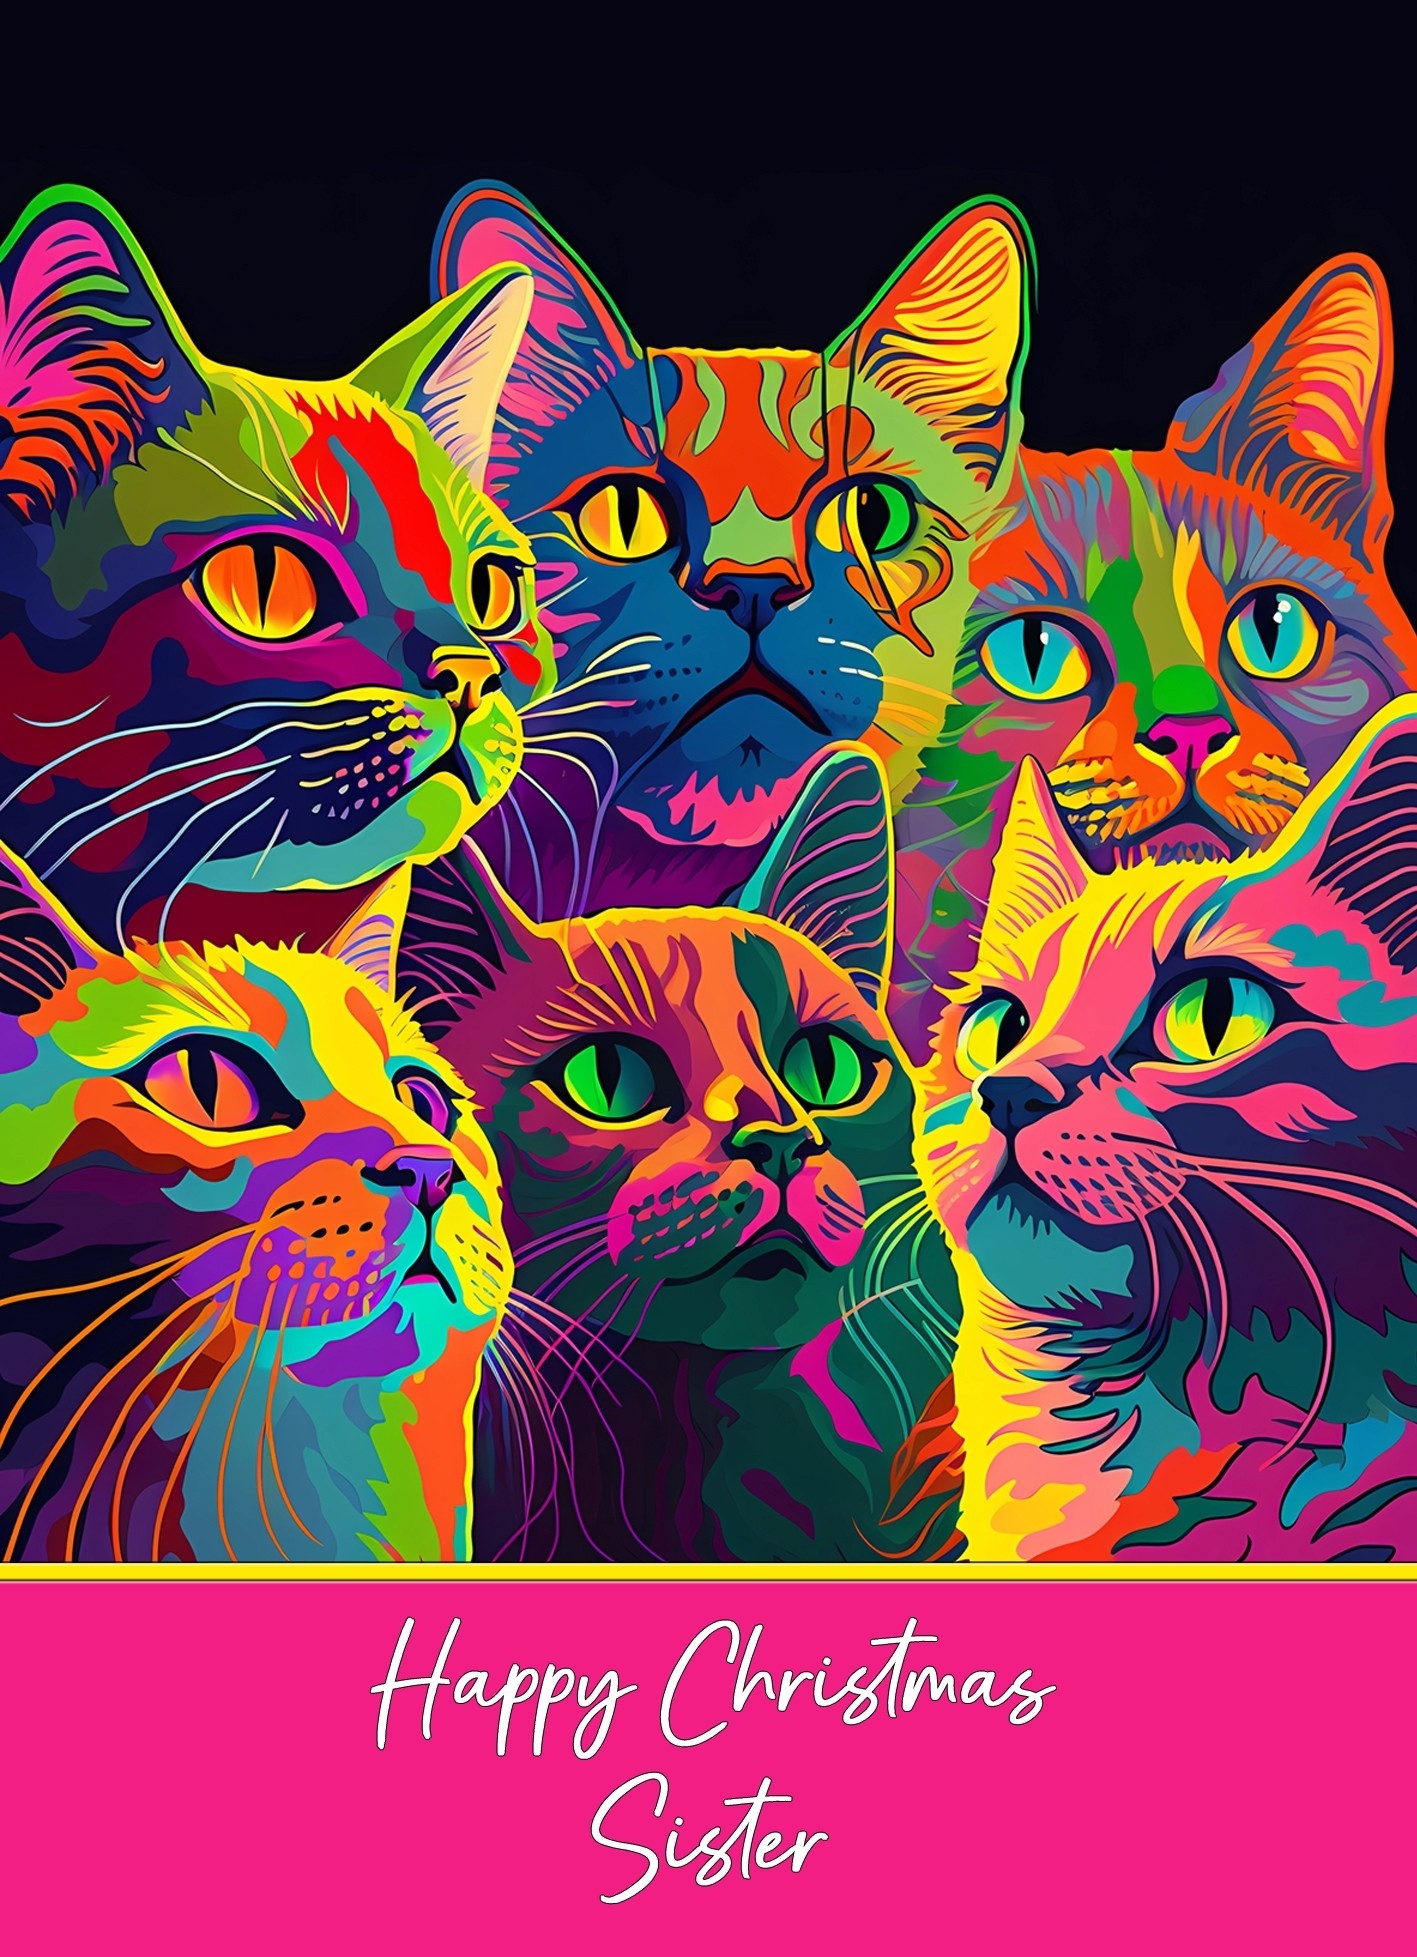 Christmas Card For Sister (Colourful Cat Art)